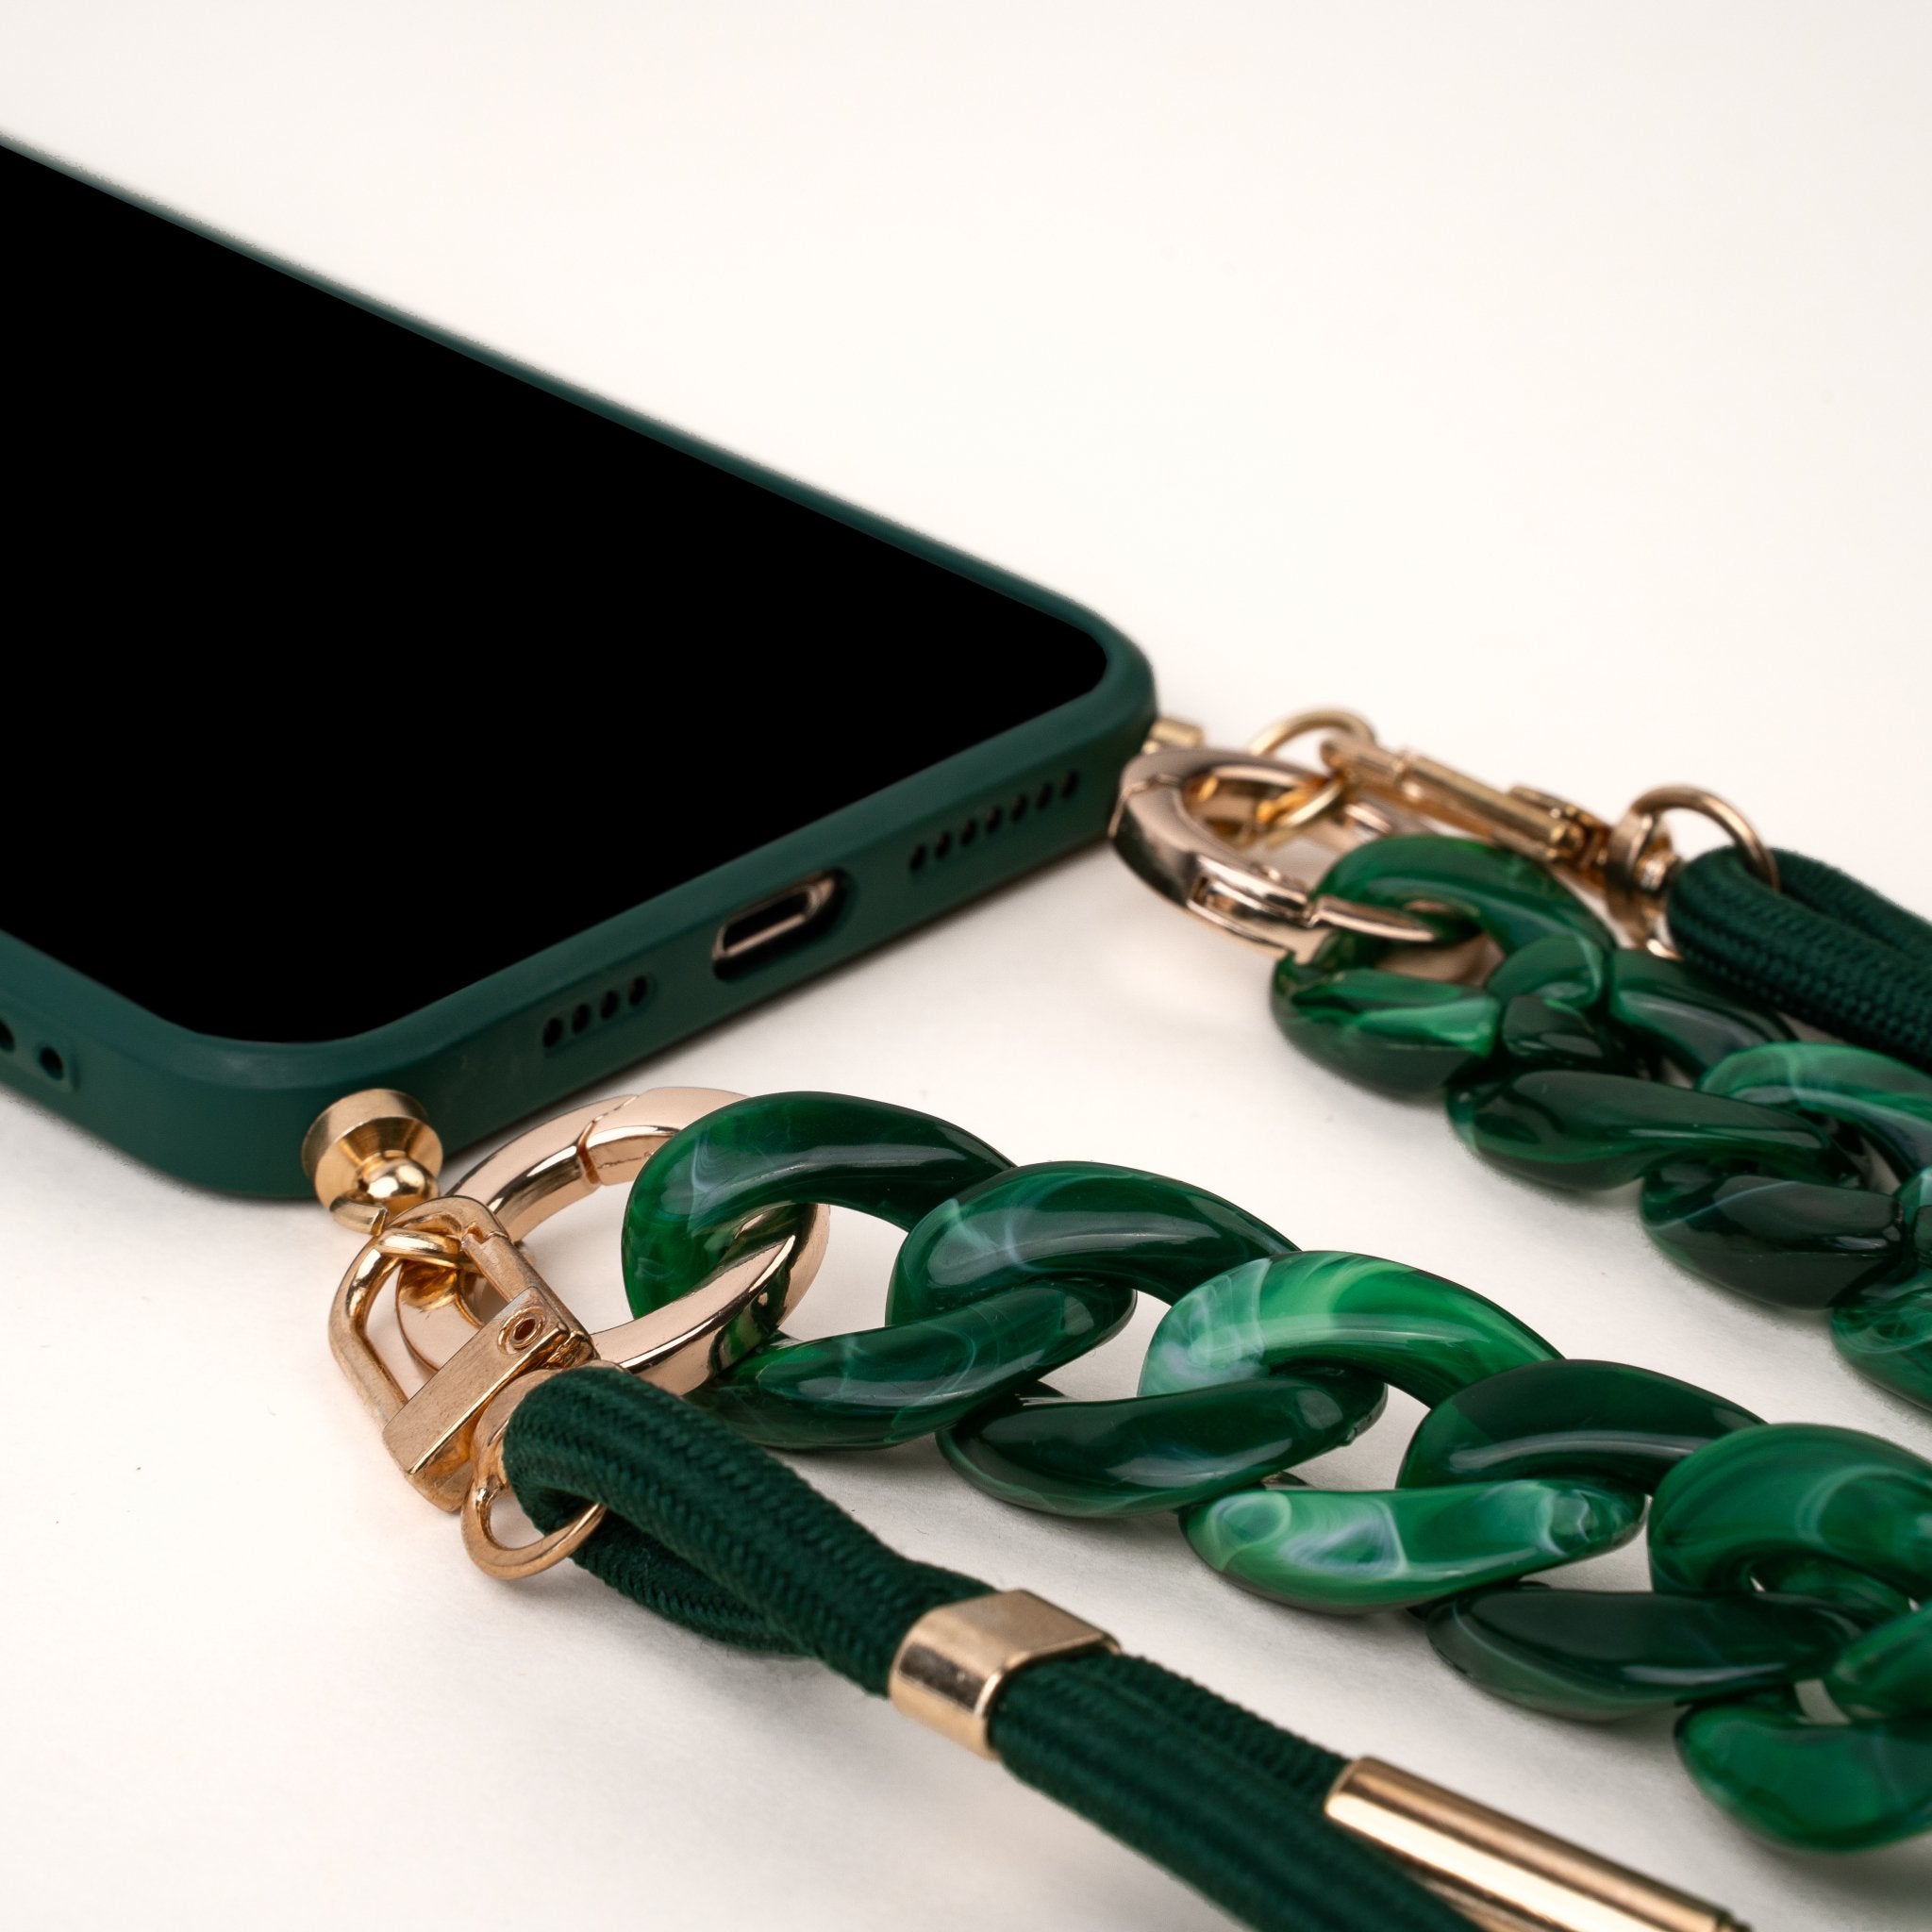 iPhone Strap Case "Amber Green" - House Of Case